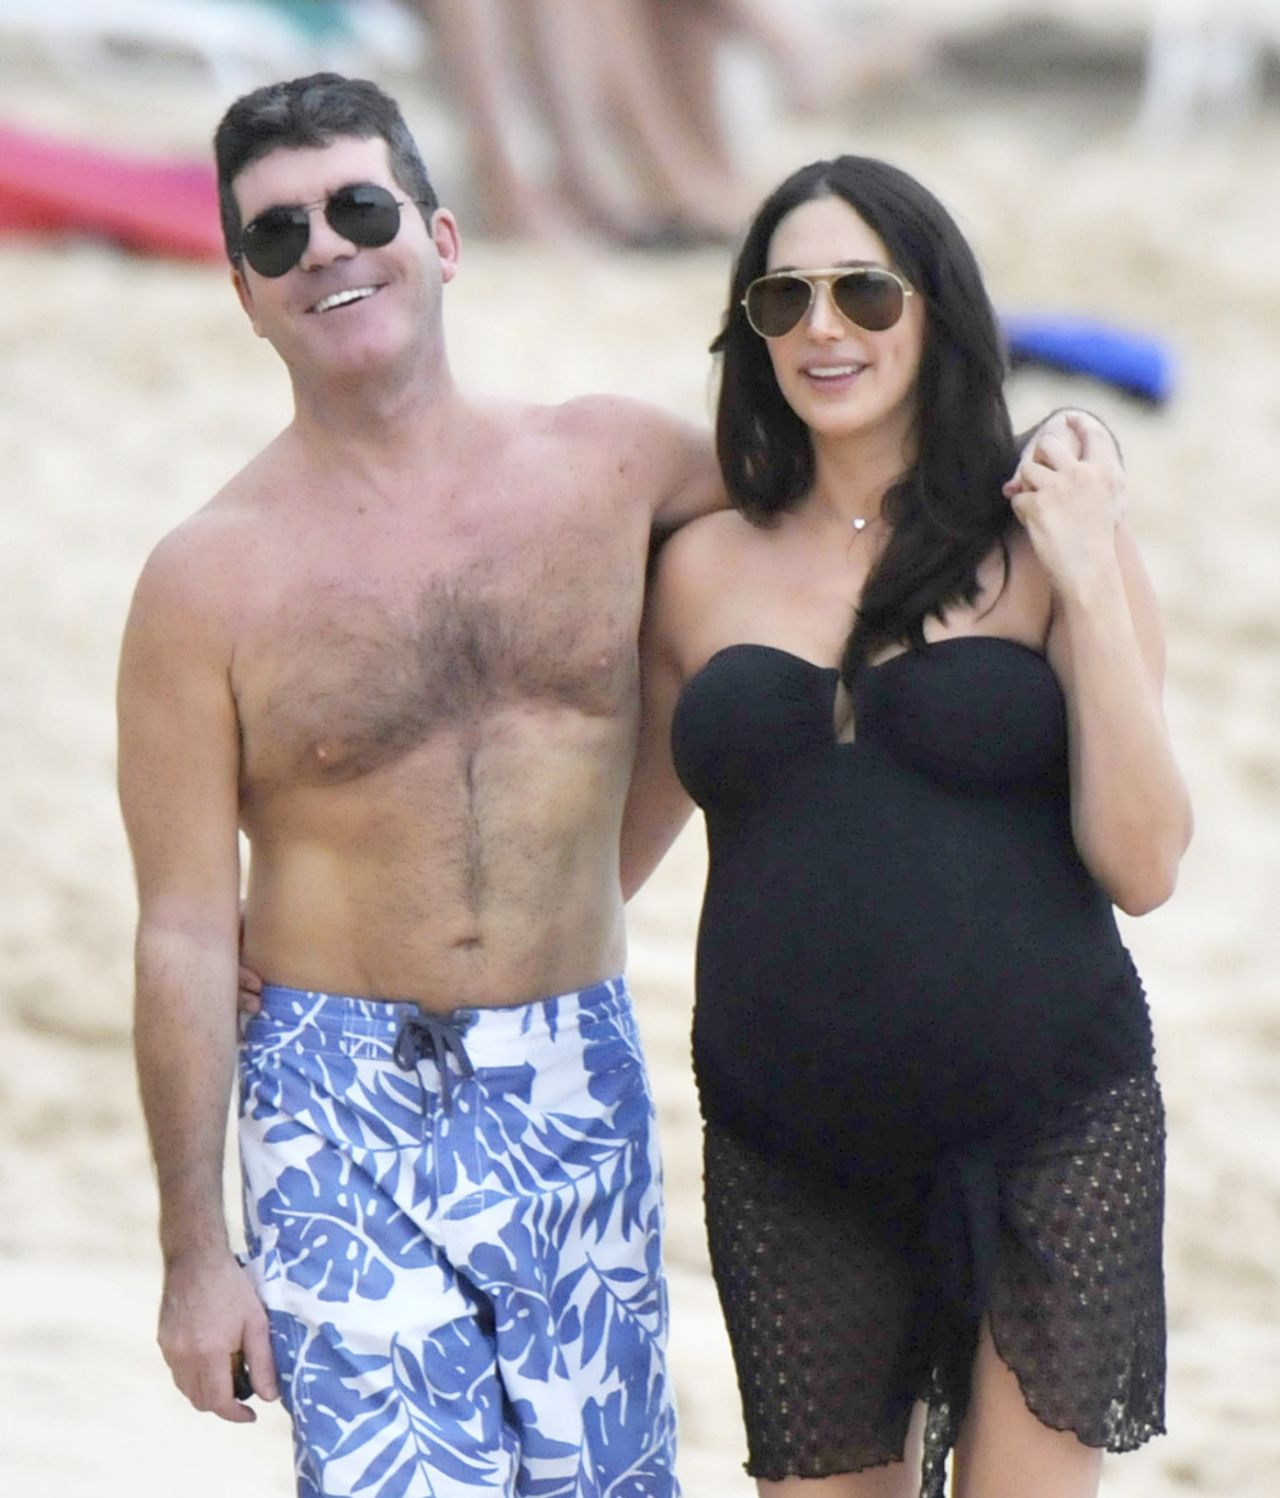 Simon Cowell and his pregnant girlfriend, Lauren Silverman, were all smiles at the beach in Barbados on December 26.